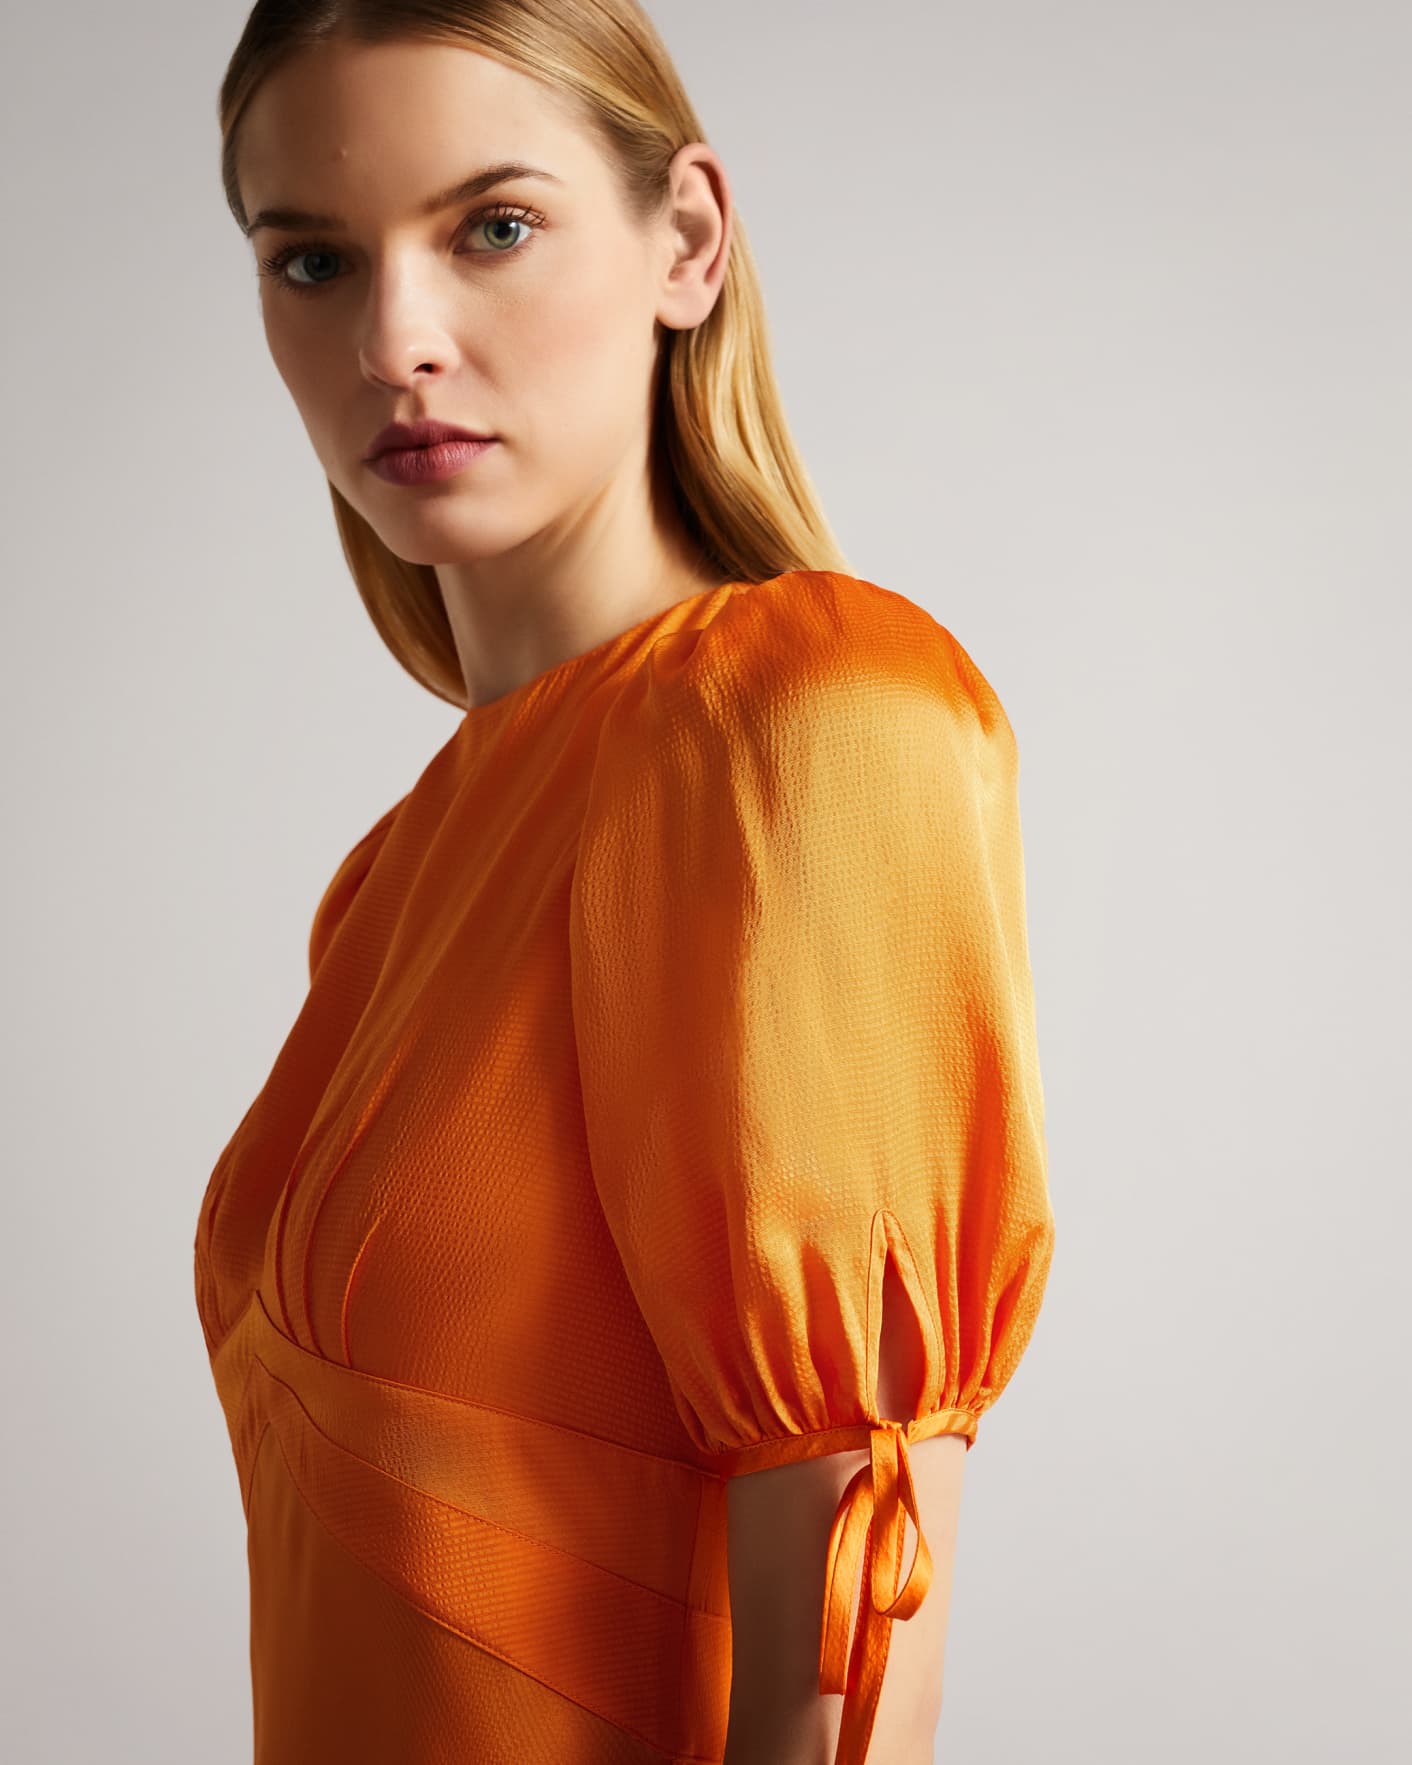 Orange Robe satinée coupe empire Ted Baker